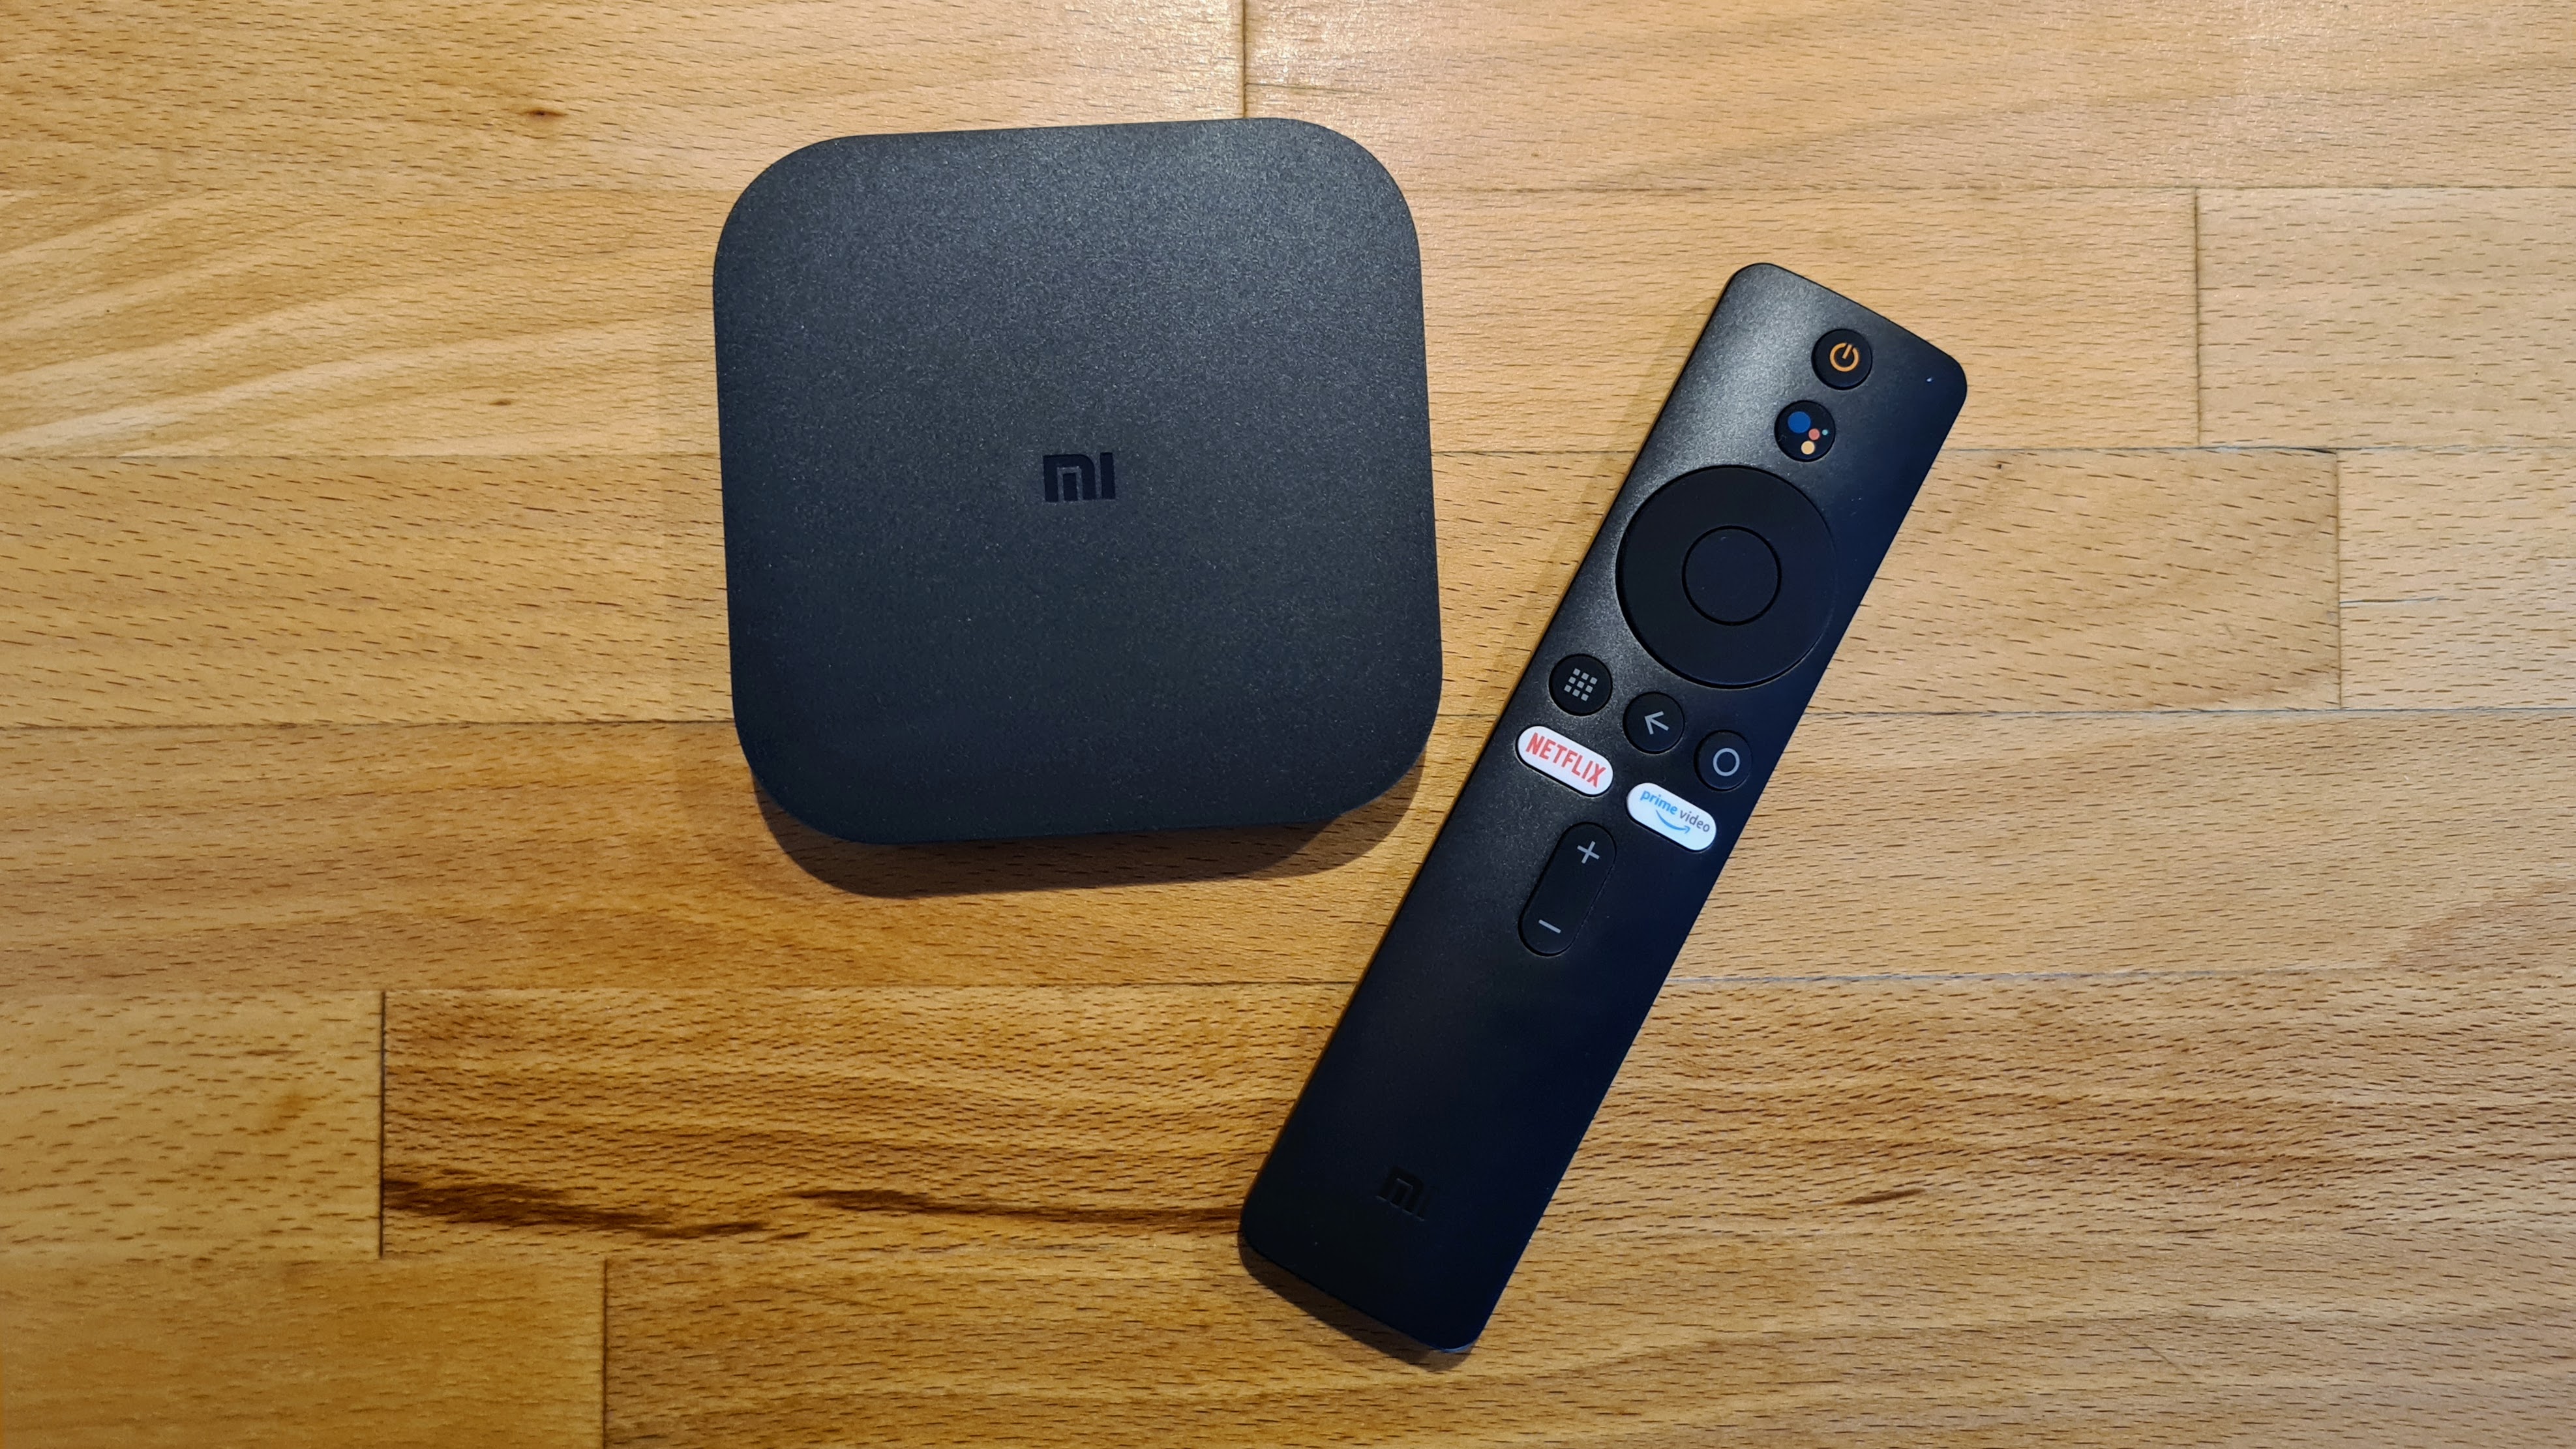 Xiaomi Mi Box S 4K TV Box: Top 5 Reasons To have it for Your TV 